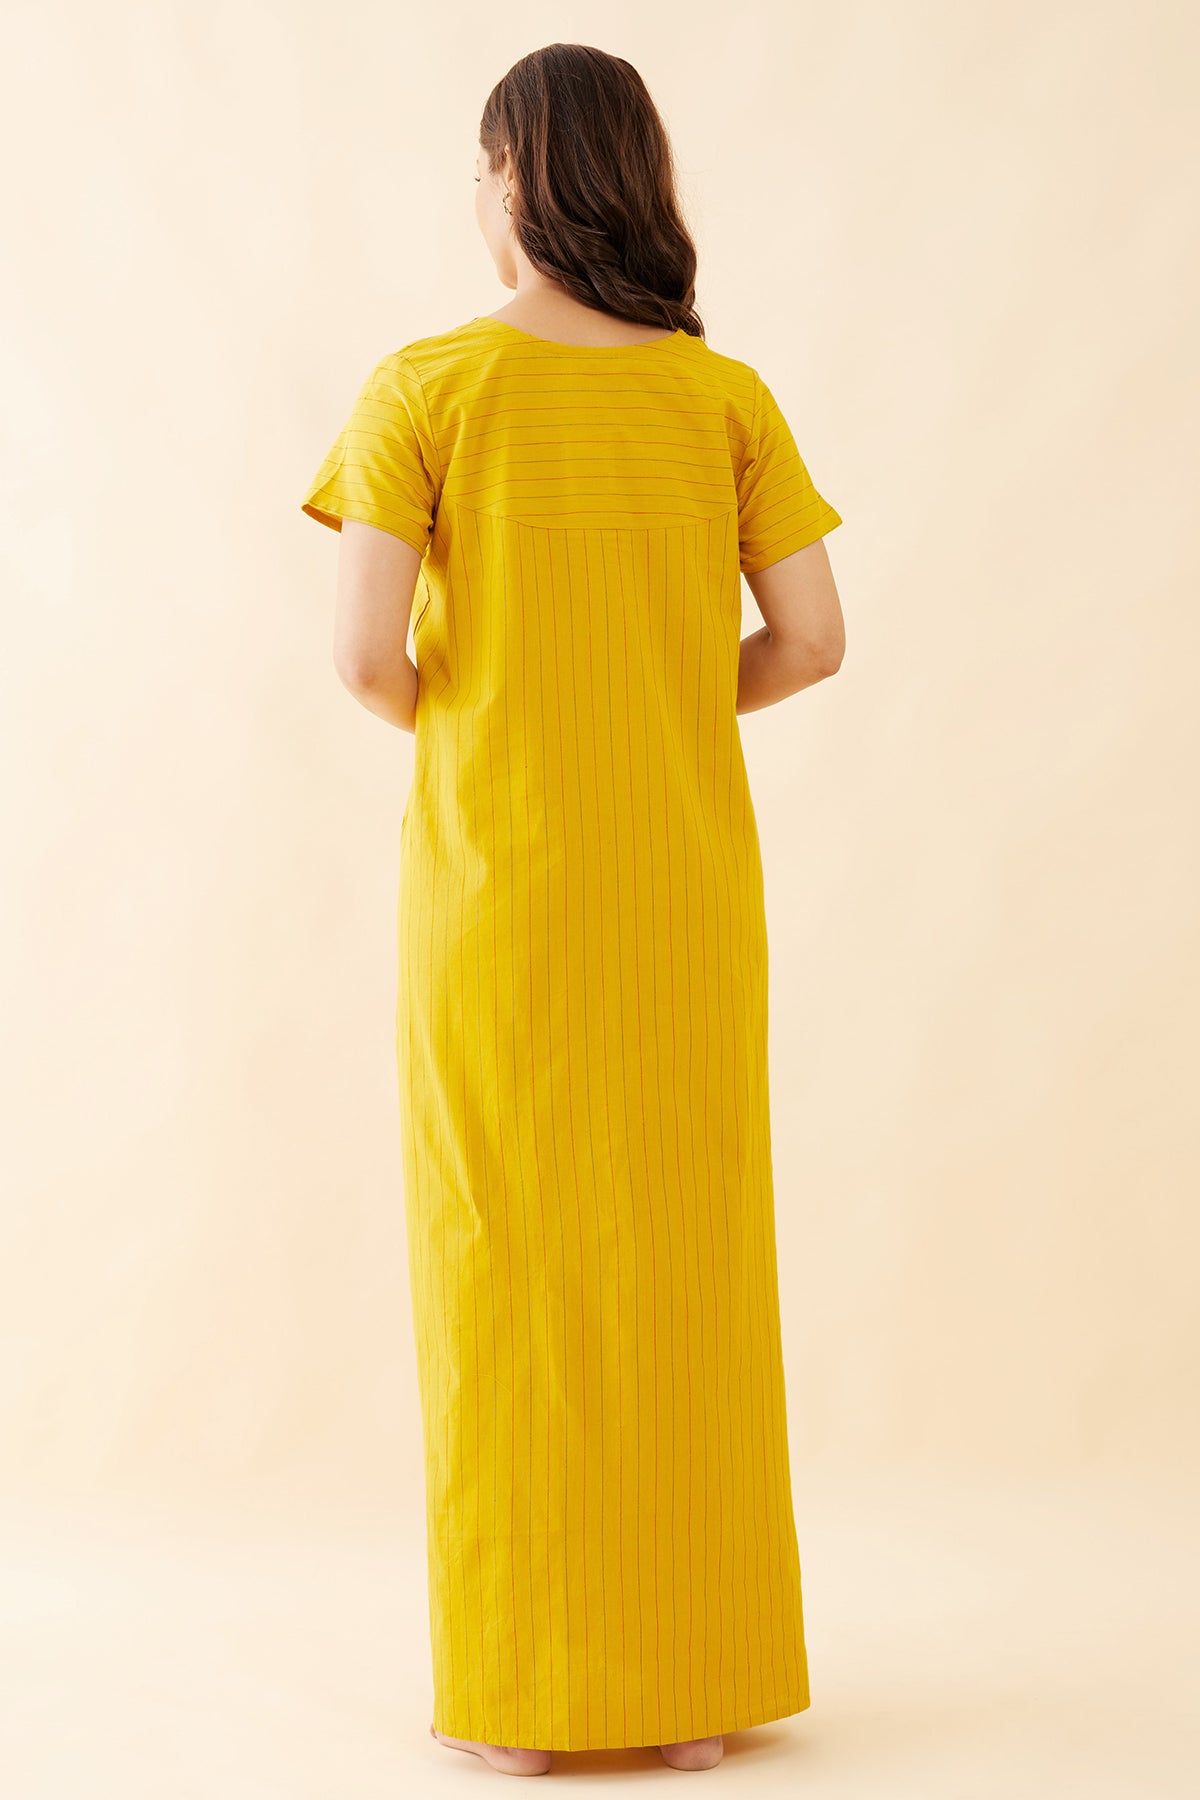 Allover Striped With Floral Embroidered Nighty - Yellow